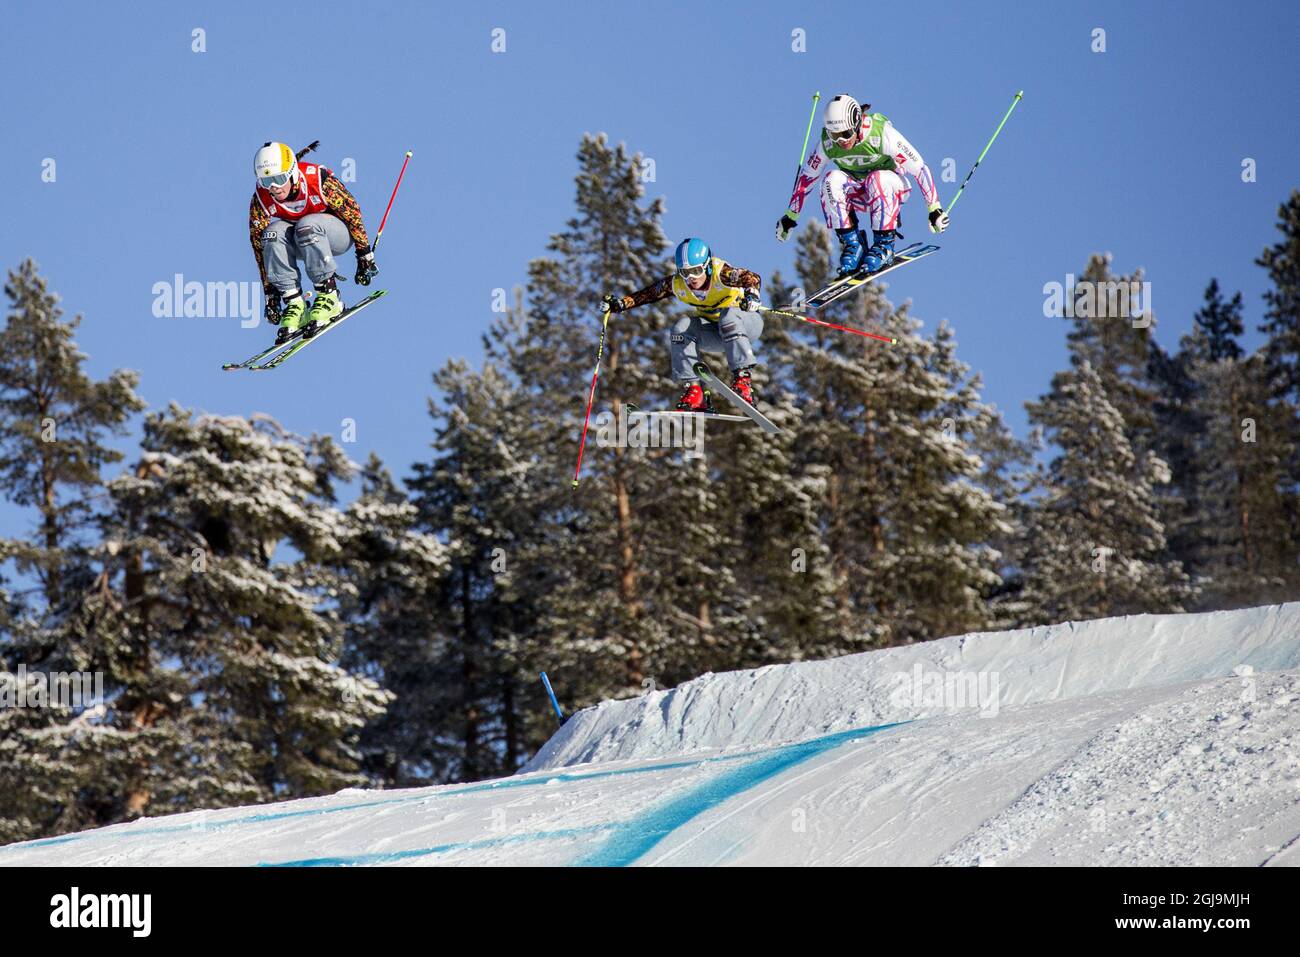 Marielle Thompson Canada skies to win the semi-final behind is Alizee Baron France and Kelsy Serwa, Canada during Sunday Feb. 14, 2016 World Cup Freestyle Ski Cross in Idre, Sweden. Photo: Christine Olsson / TT /  Stock Photo